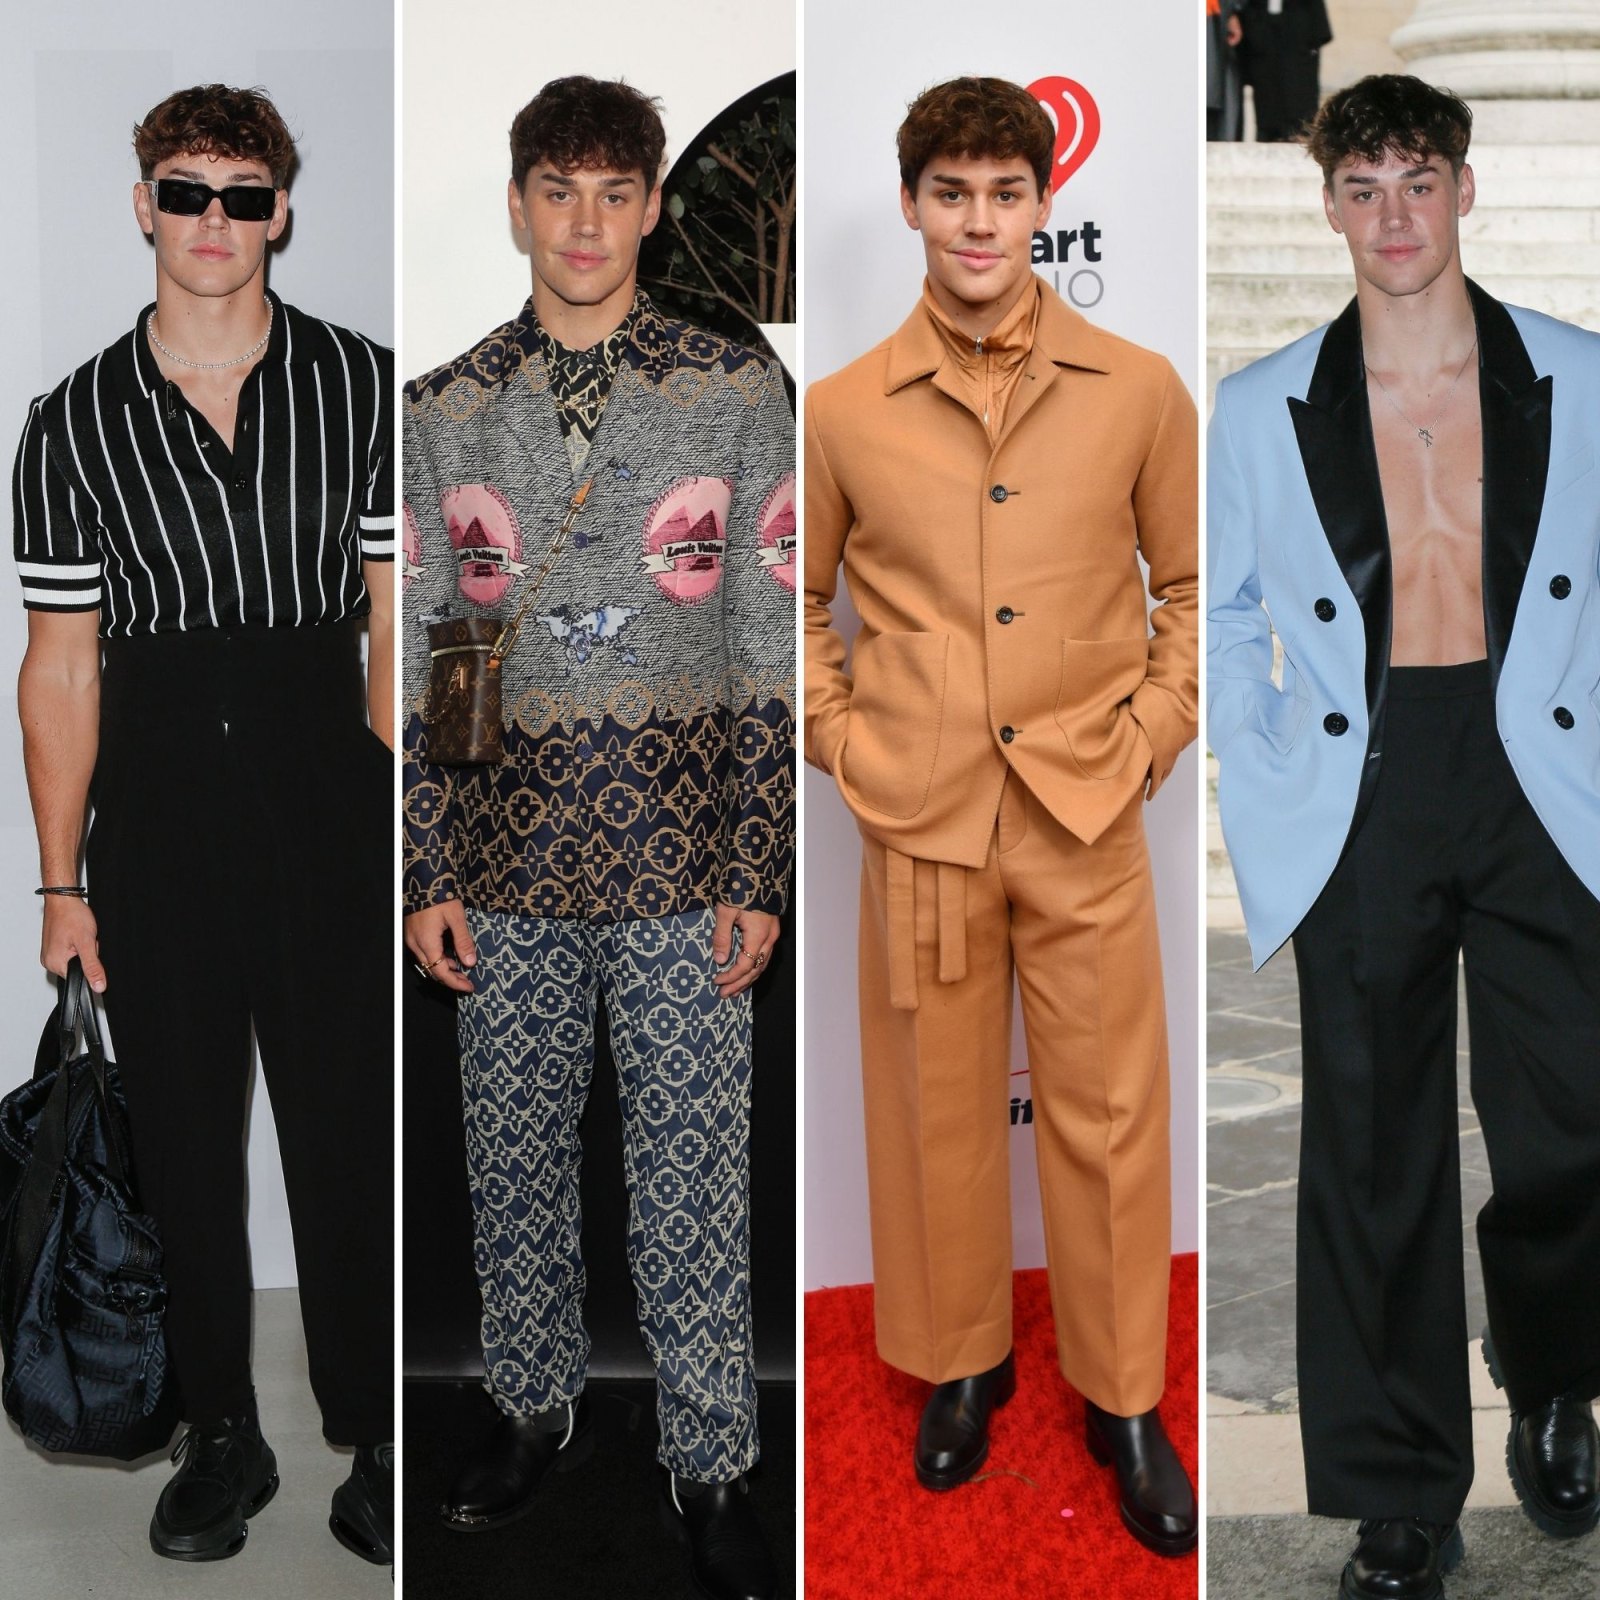 Noah Beck's Best Style Moments: Photos of His Looks, Outfits